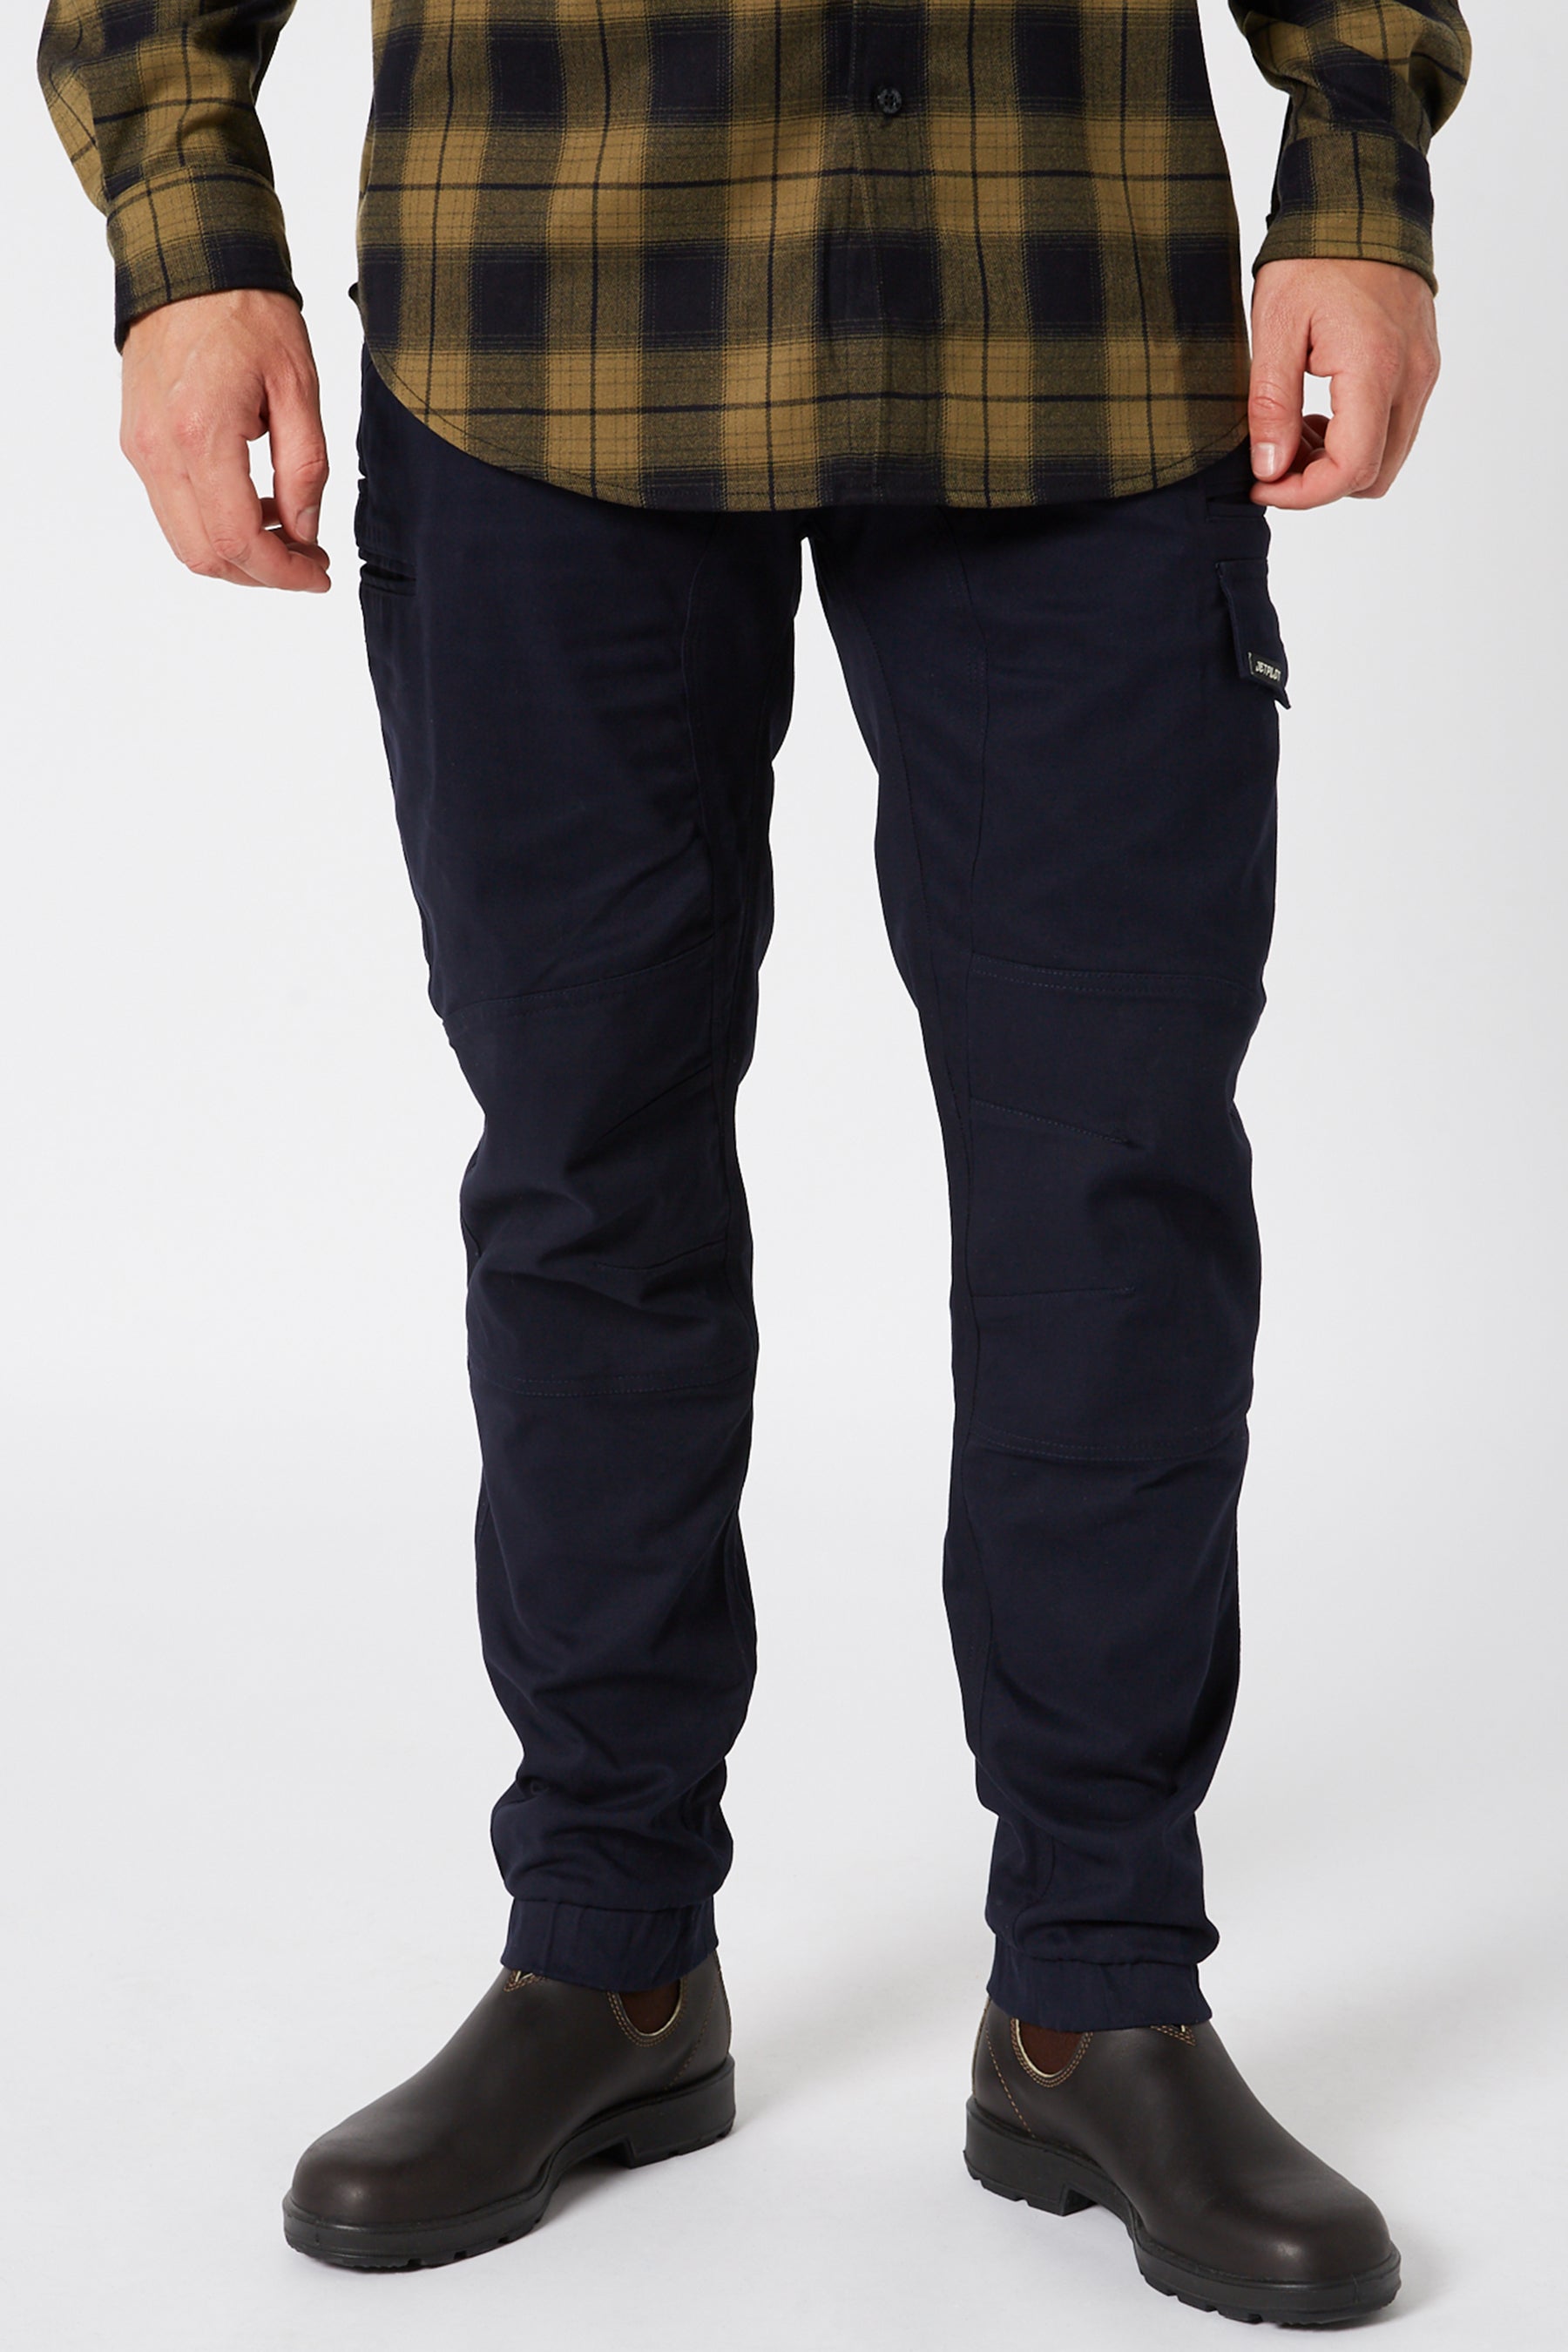 JP Fueled Cuff Pant - Ink